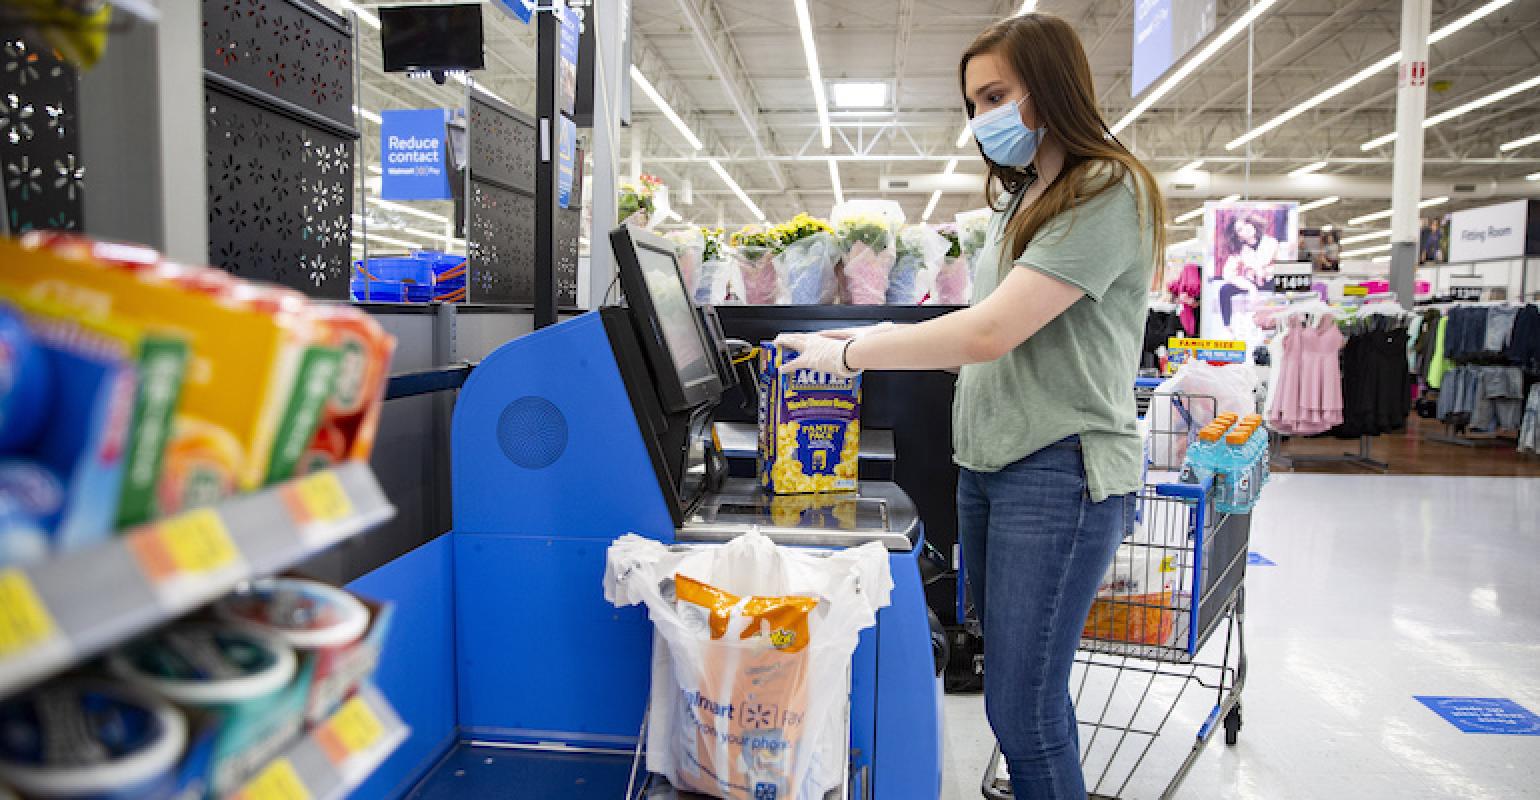 Walmart Earnings: Retailer's Sales and Profits Rise, Fueled by